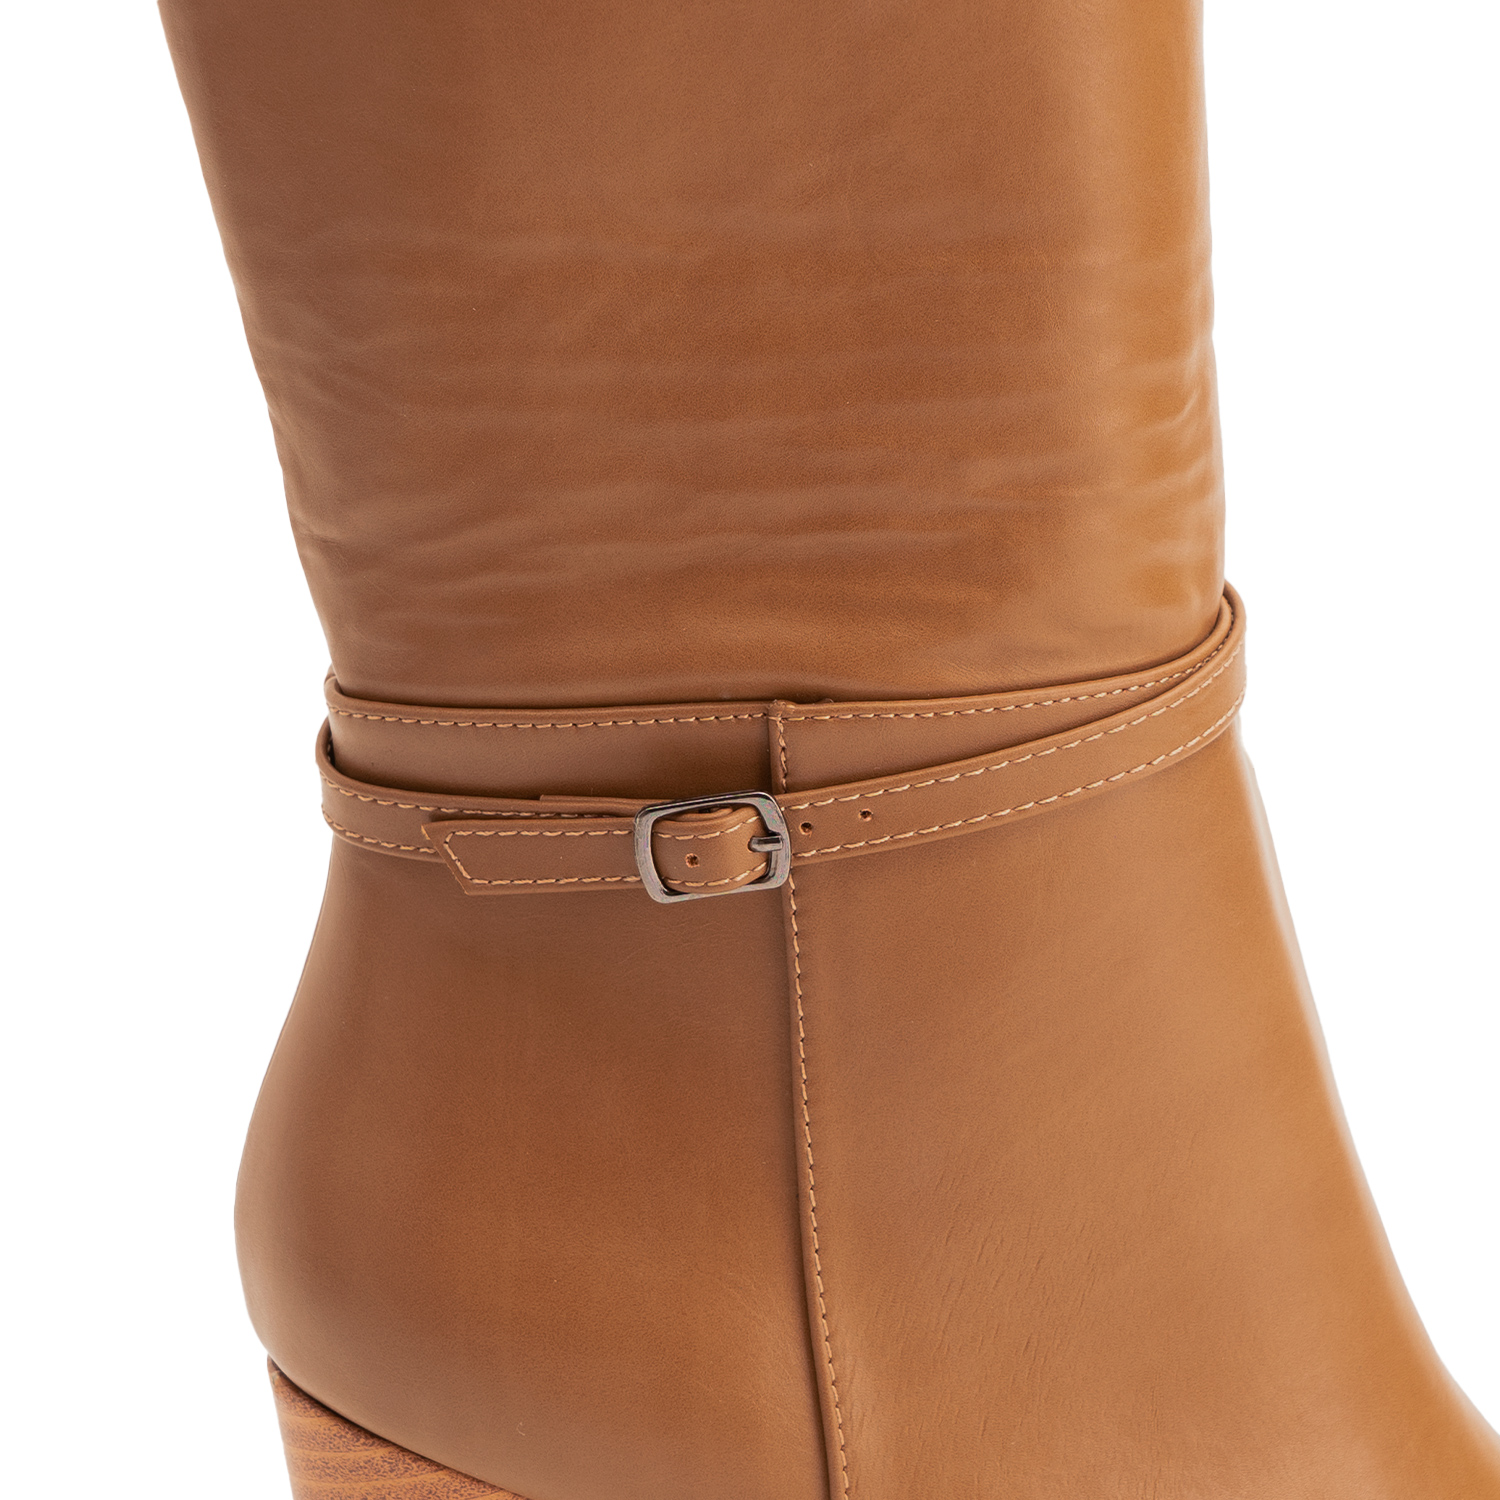 Hohe Mid Calf Stiefel in Camel 